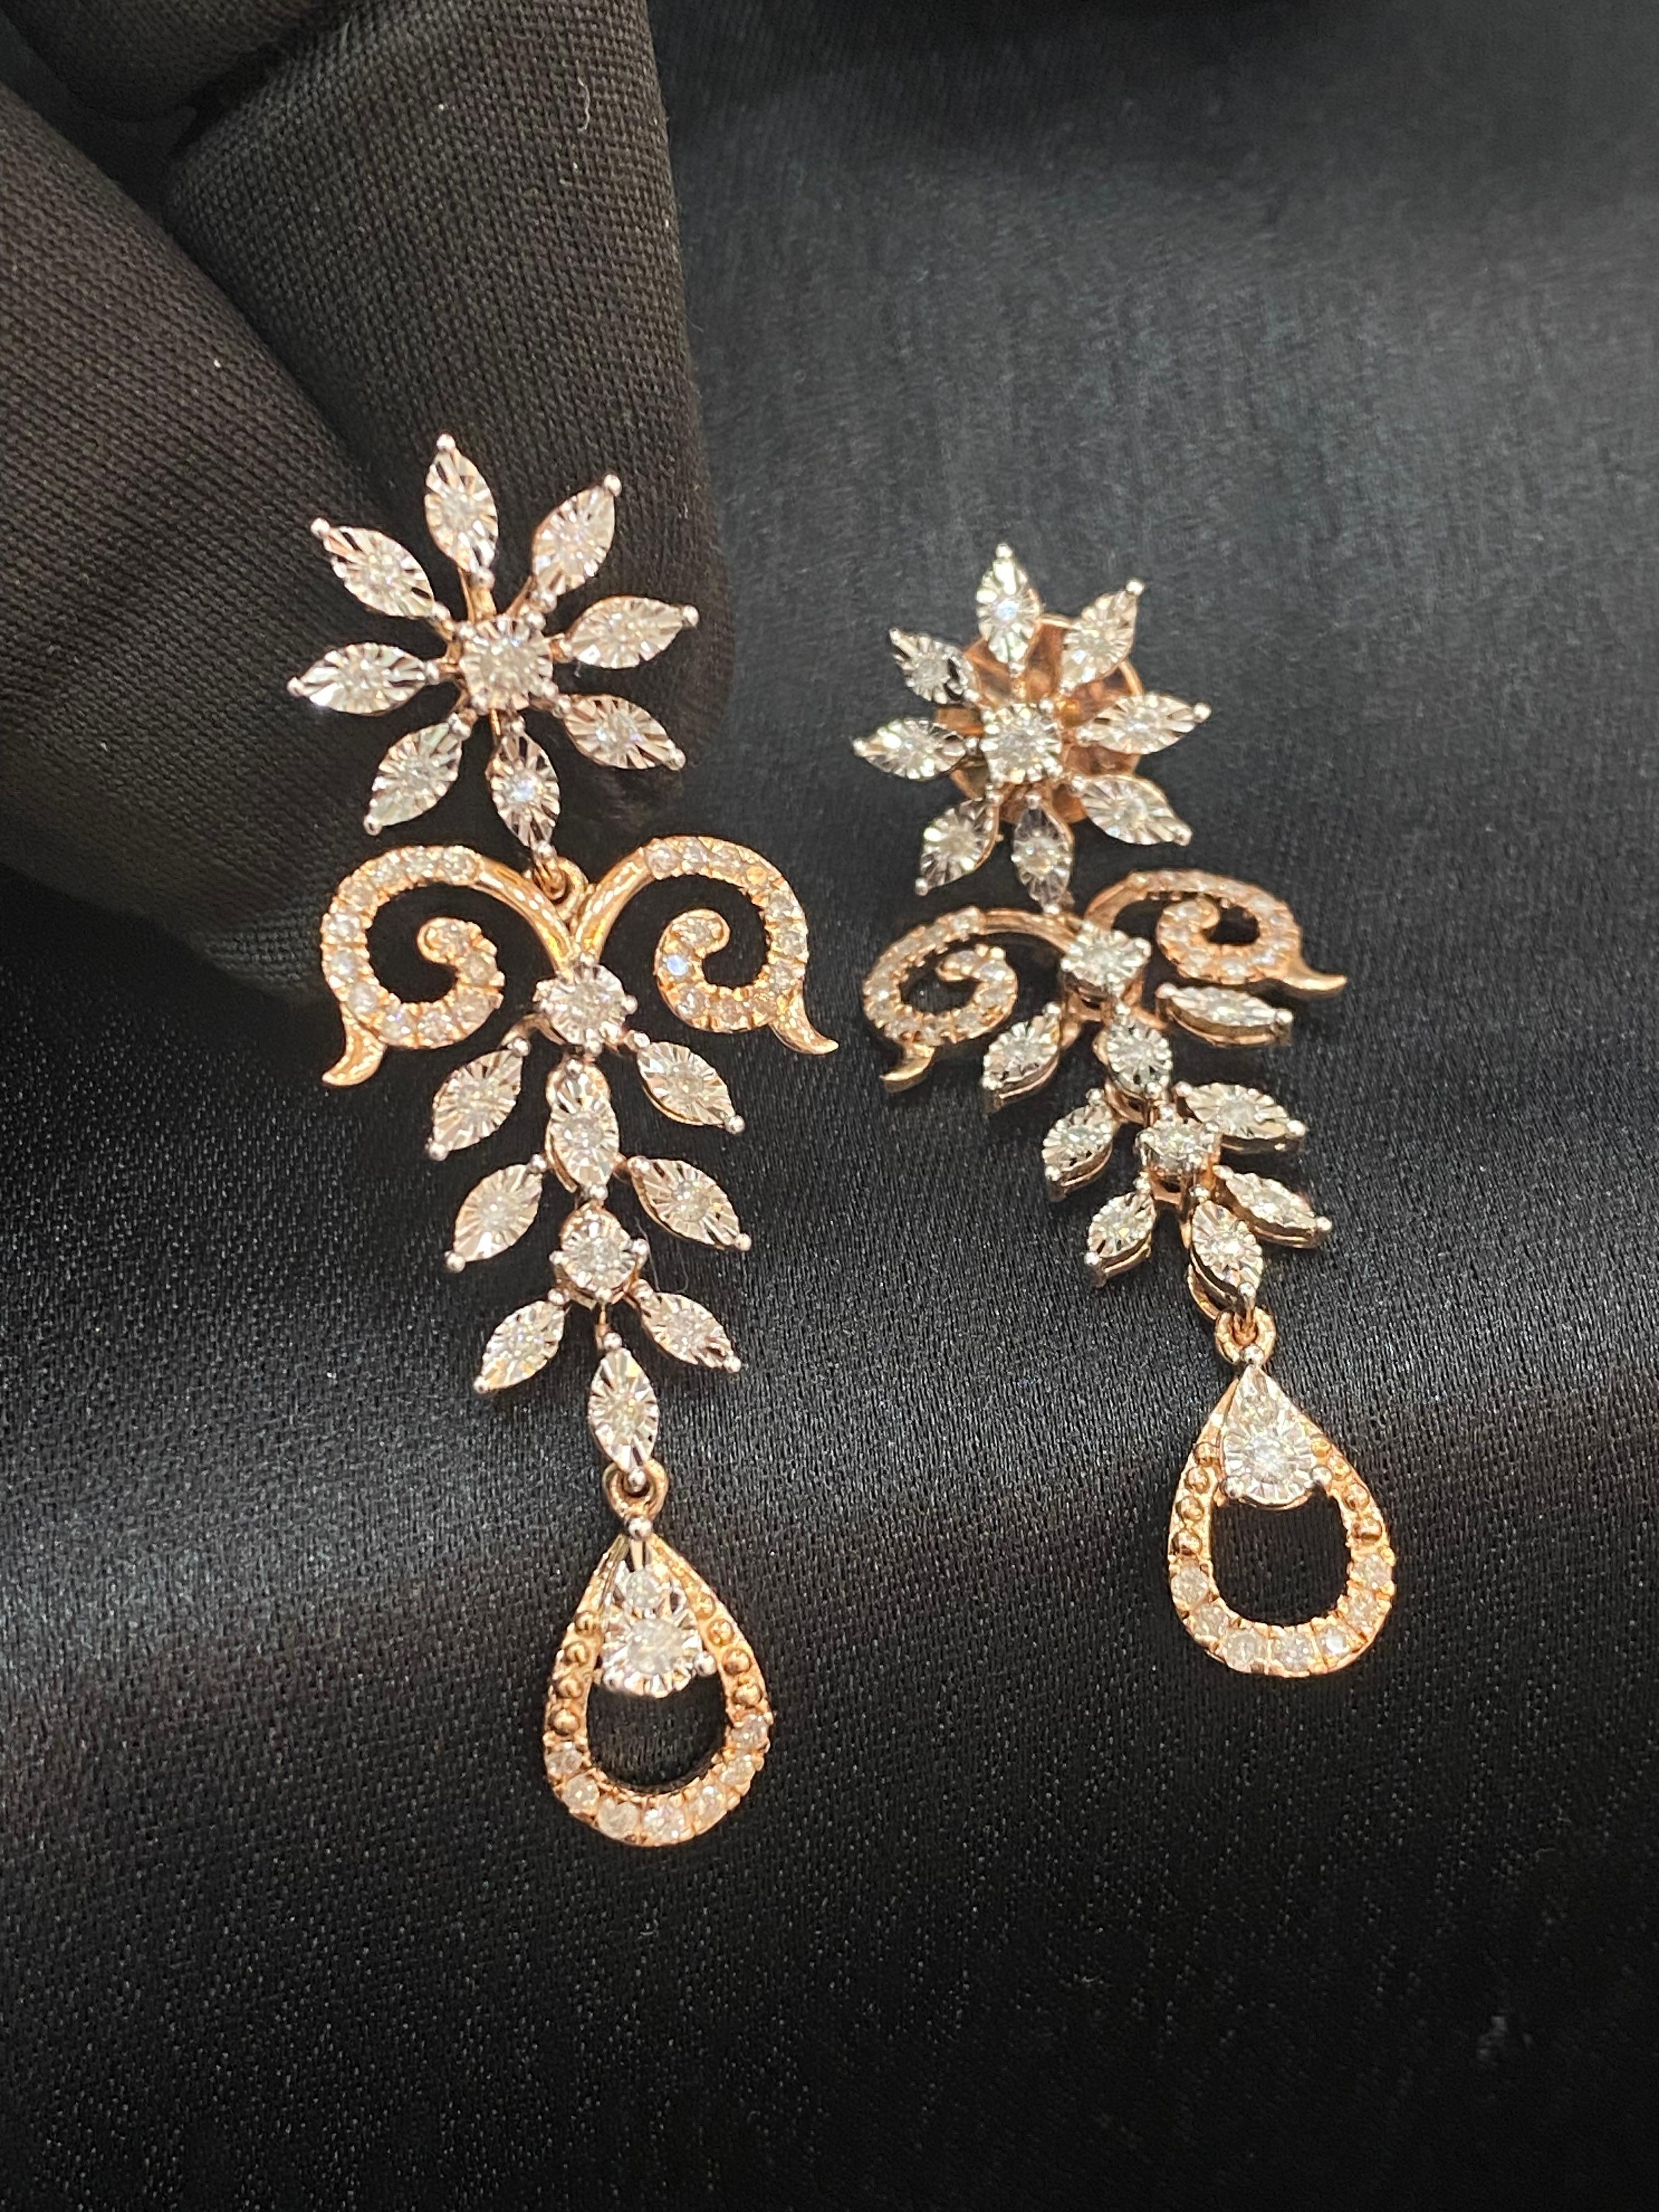 Experience the epitome of glamour with these earrings. Treat yourself to the mesmerizing beauty of our stunning 1.01 carat diamond dangle earrings, crafted in 14-carat gold, designed to evoke perpetual smiles and radiance!

Specifications :